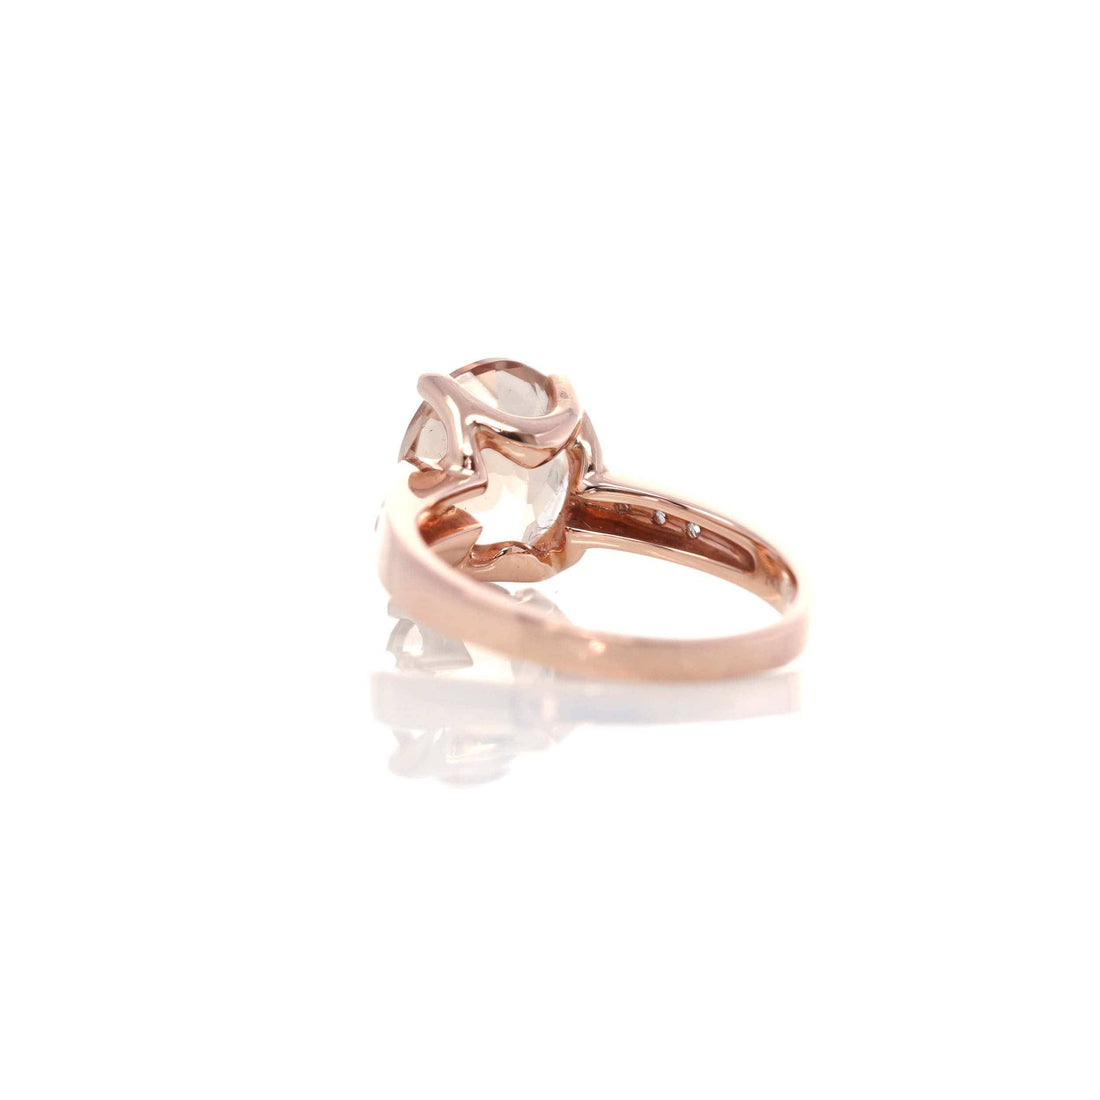 Baikalla Jewelry Gold Amethyst Ring 14k Rose Gold Natural Champagne Morganite Ring with Diamonds